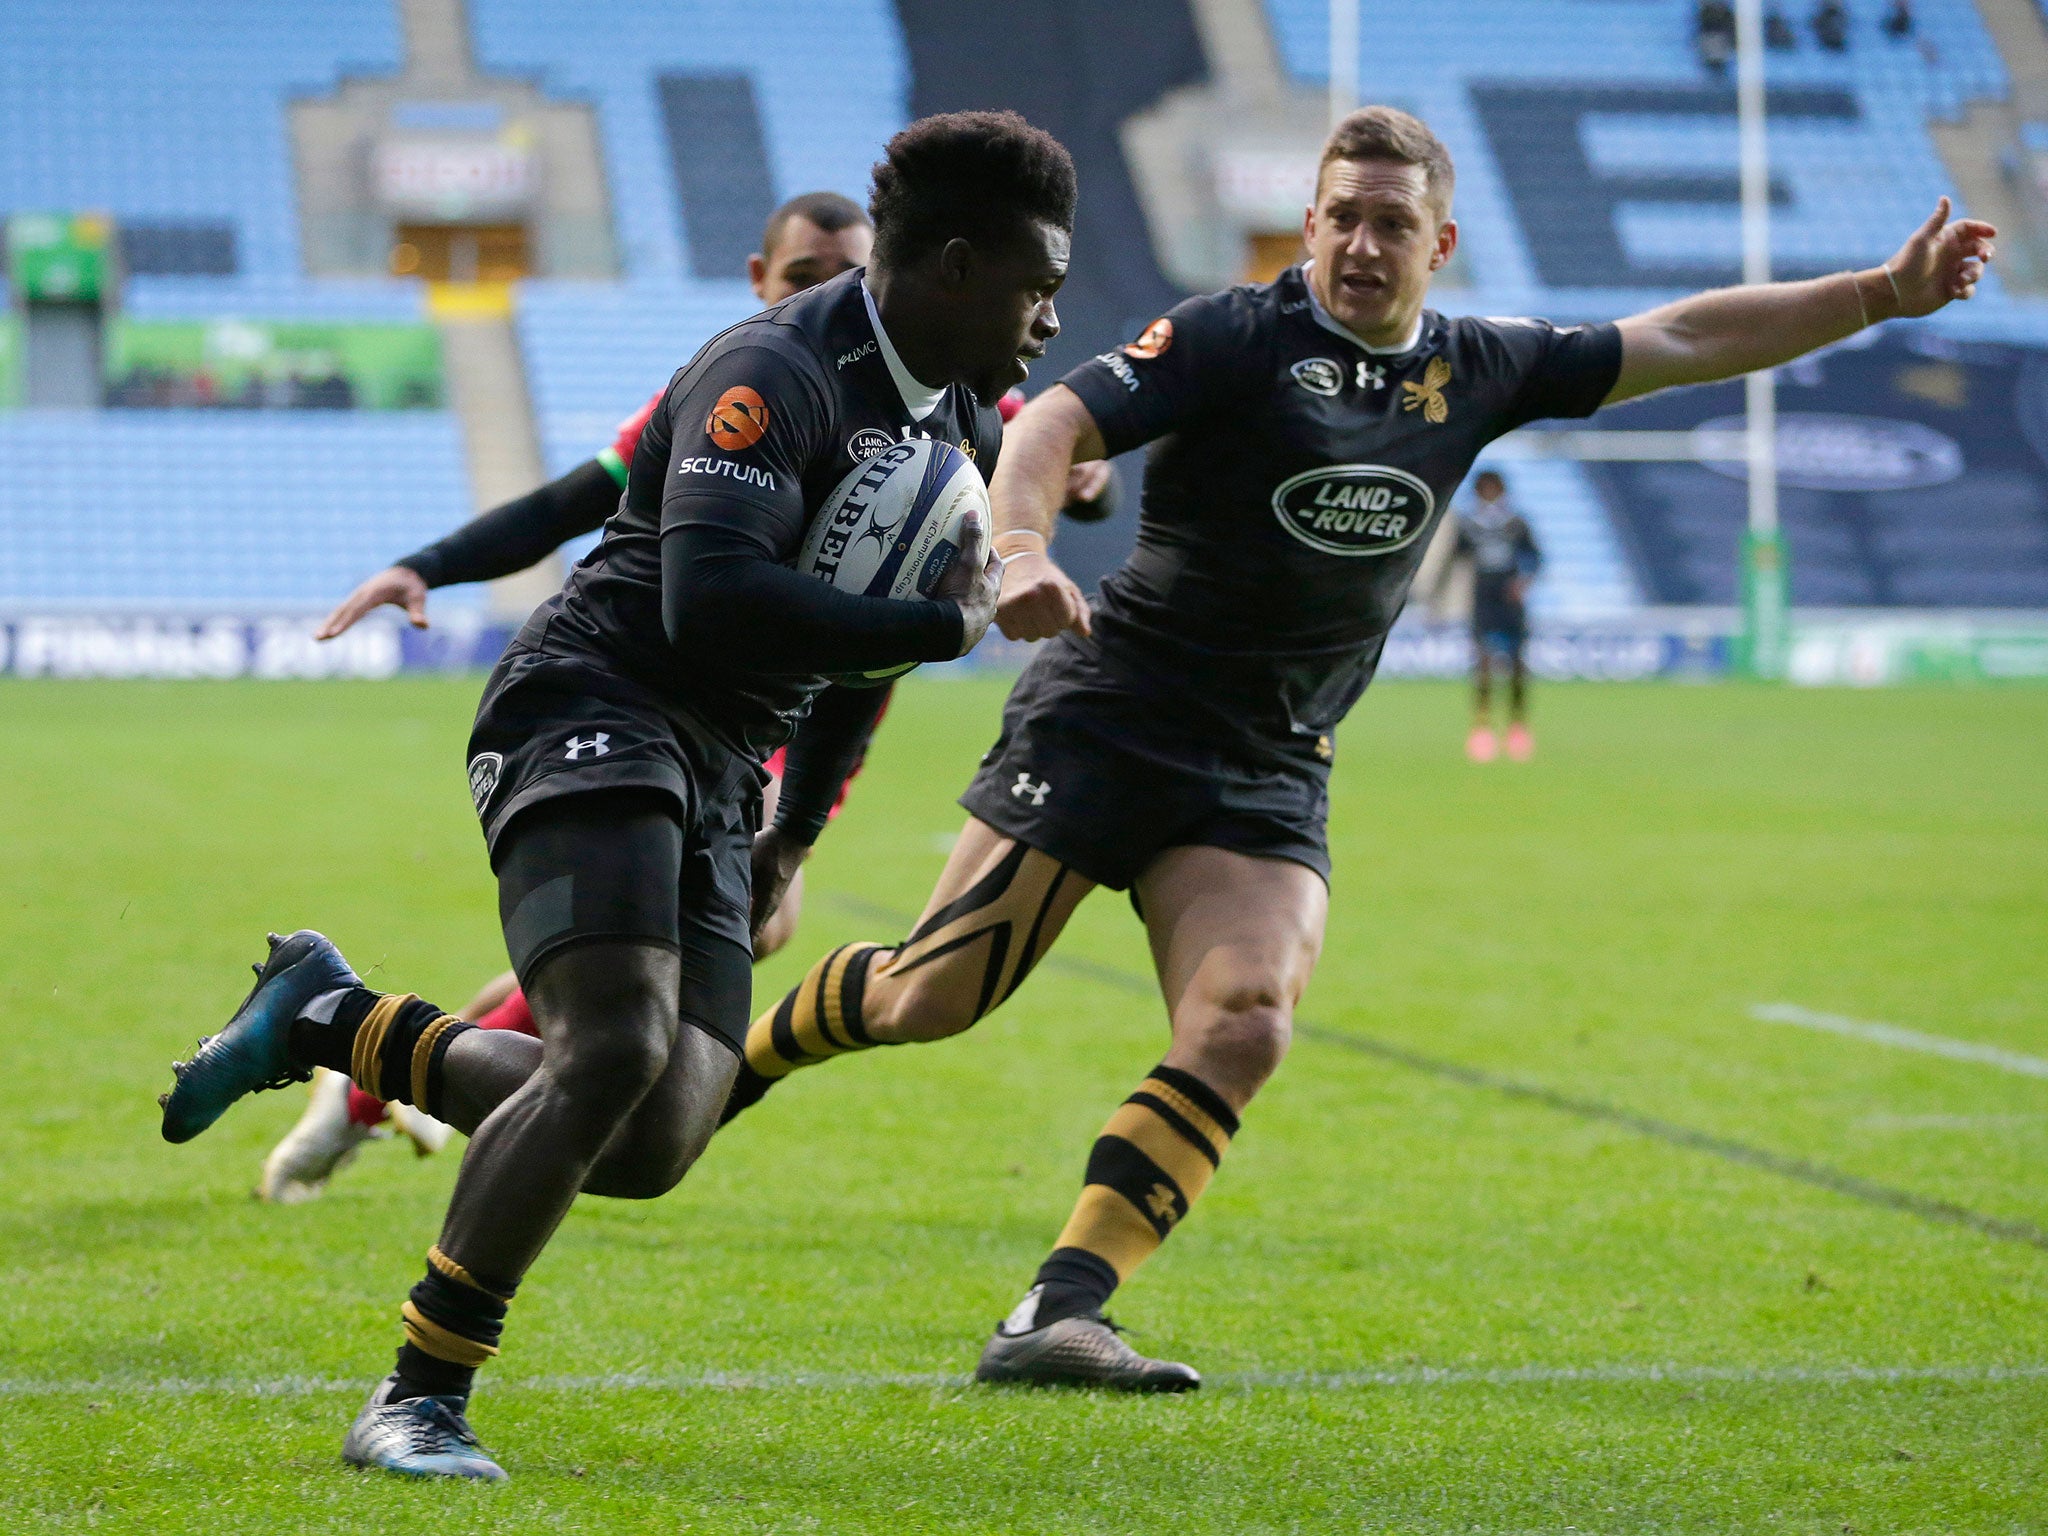 Christian Wade runs in to score Wasps' second try of the match